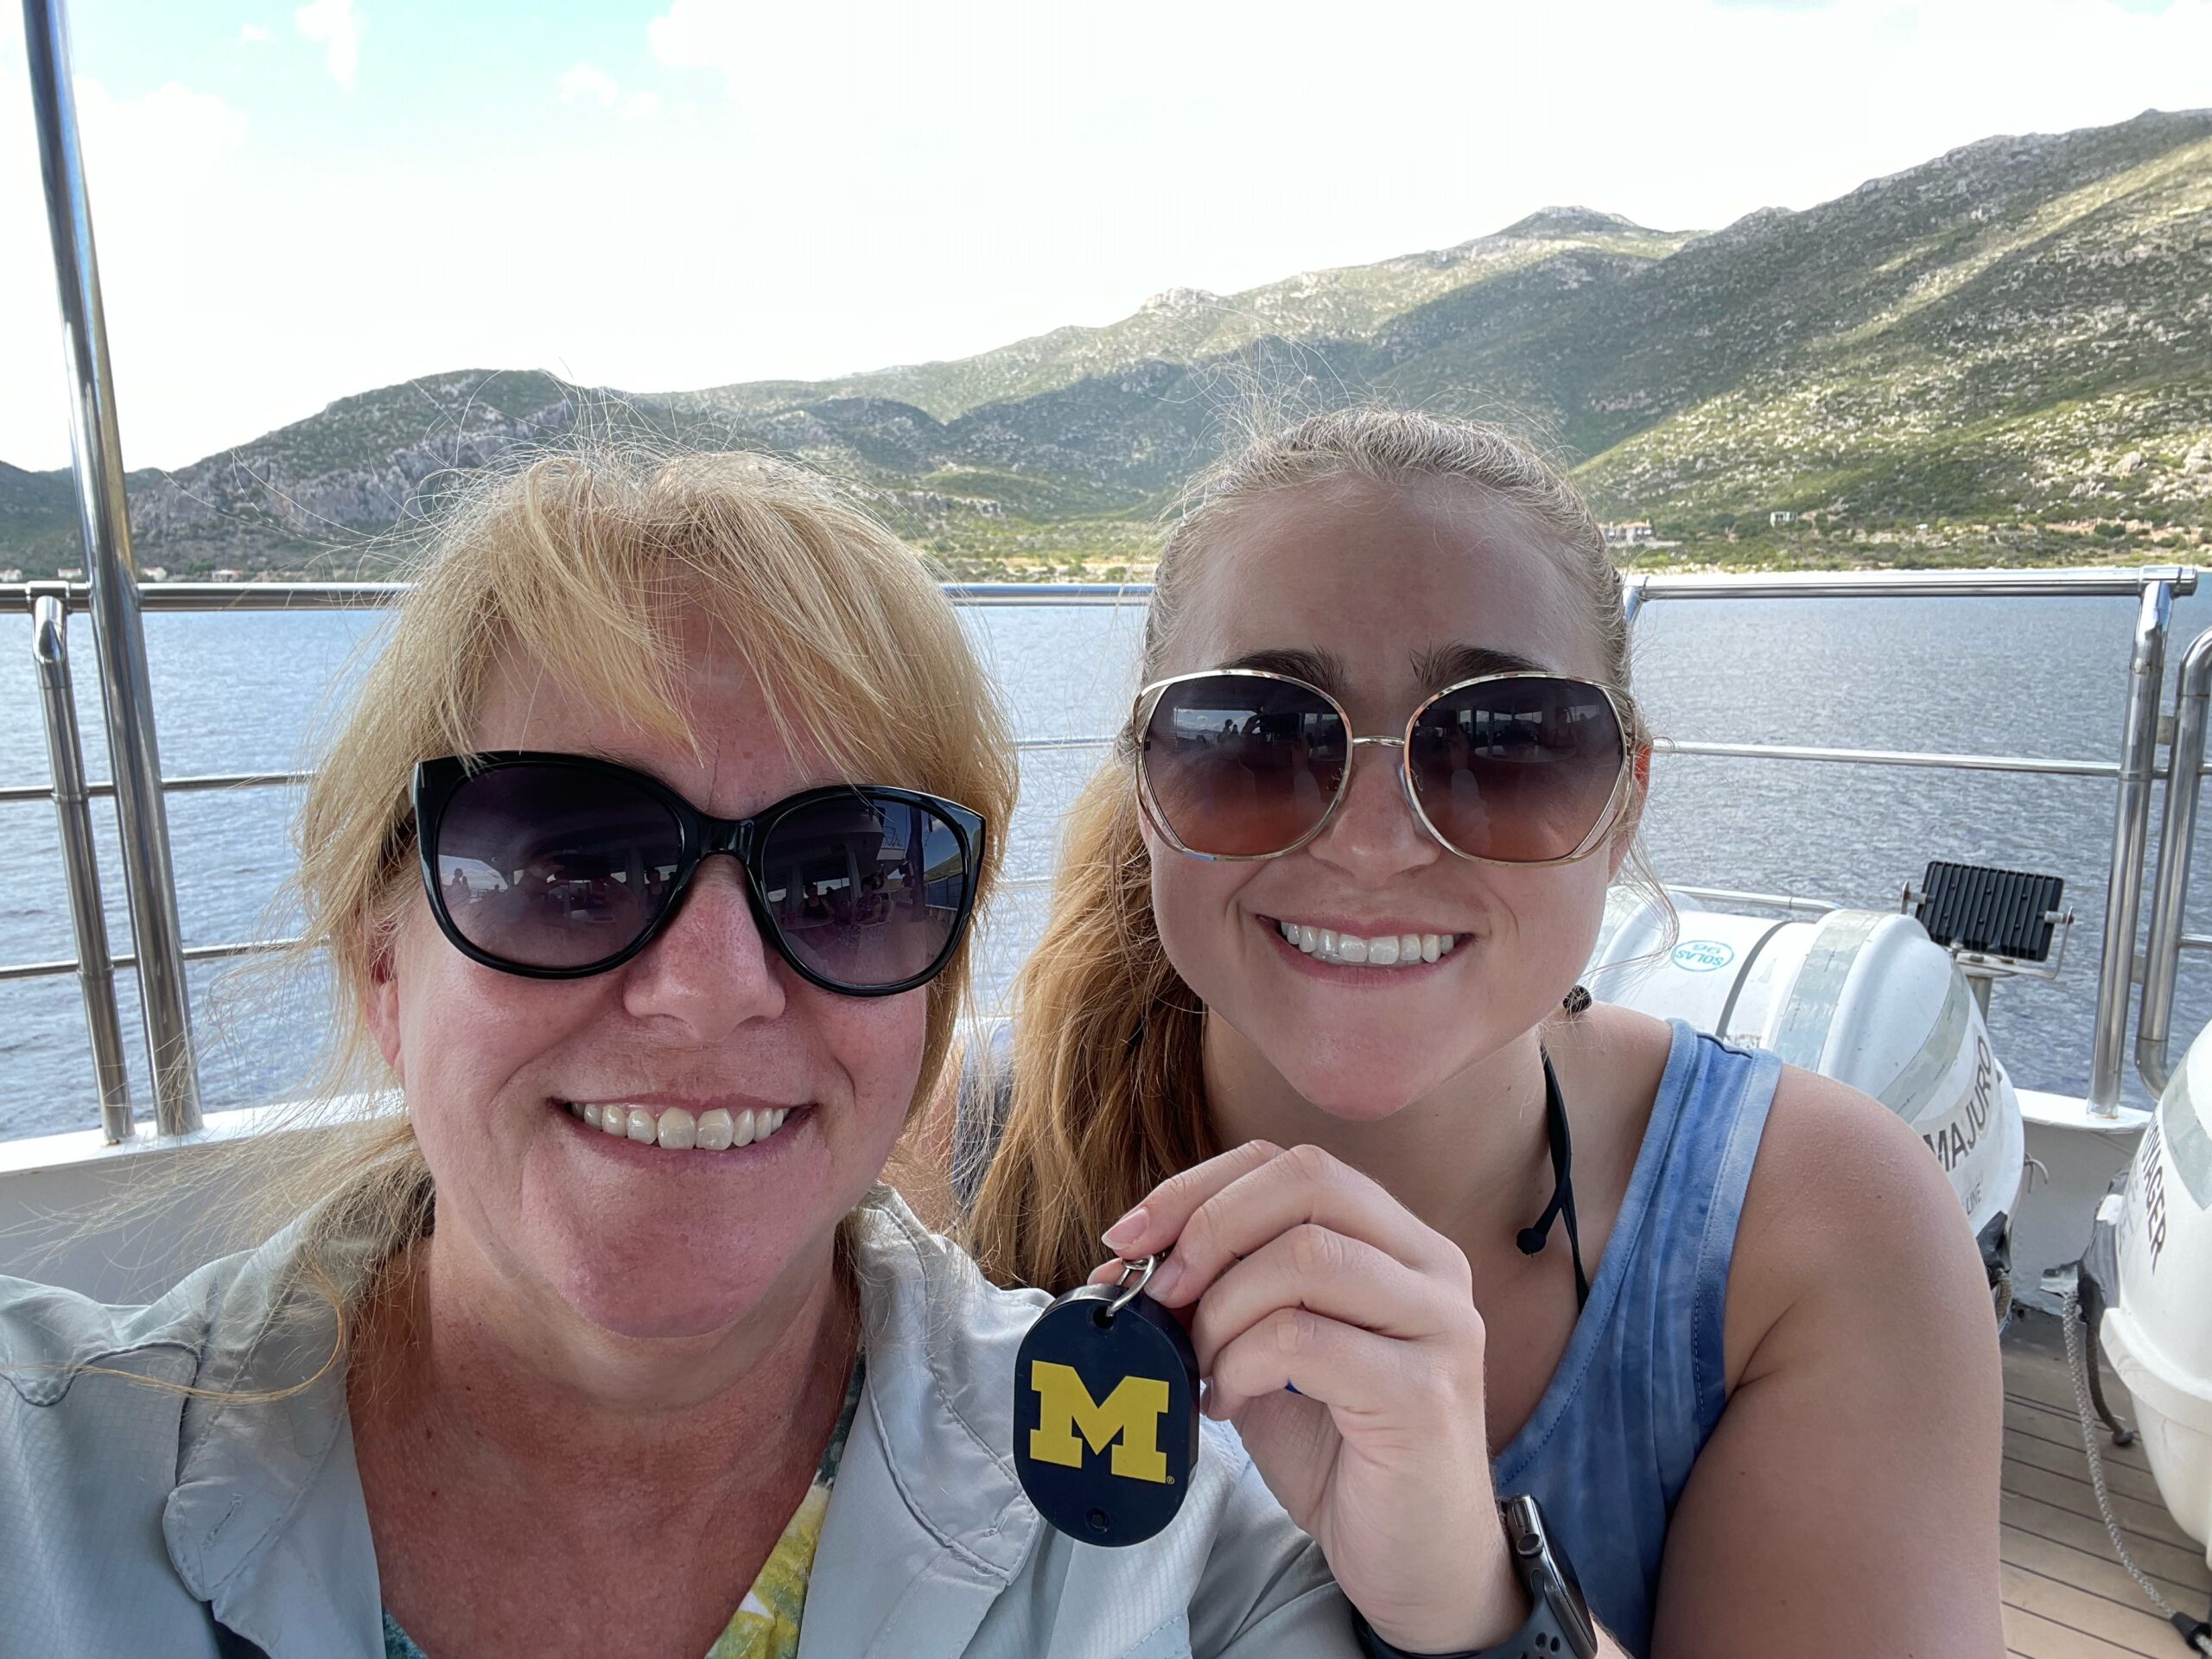 Karen Samuels Jones, ’84, and her daughter, Shannon Jones, ’18, went sailing on the Voyager of the Seas cruise, touring the Aegean Sea near Syros, Greece, in September 2022.